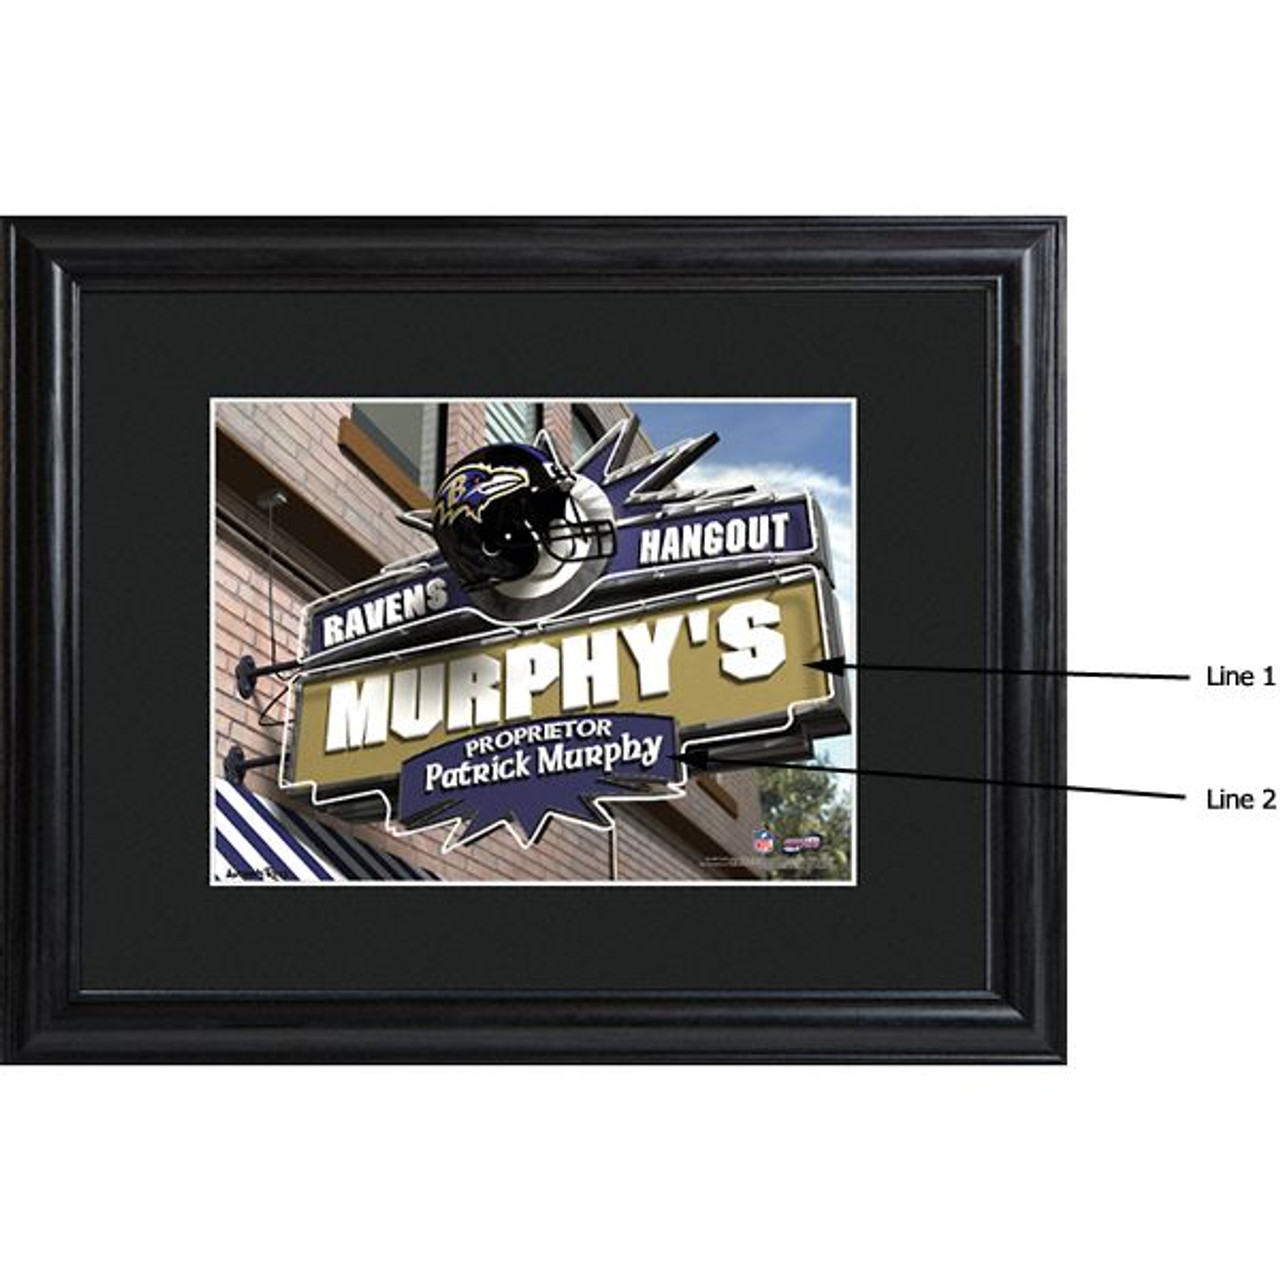 personalized baltimore ravens gifts